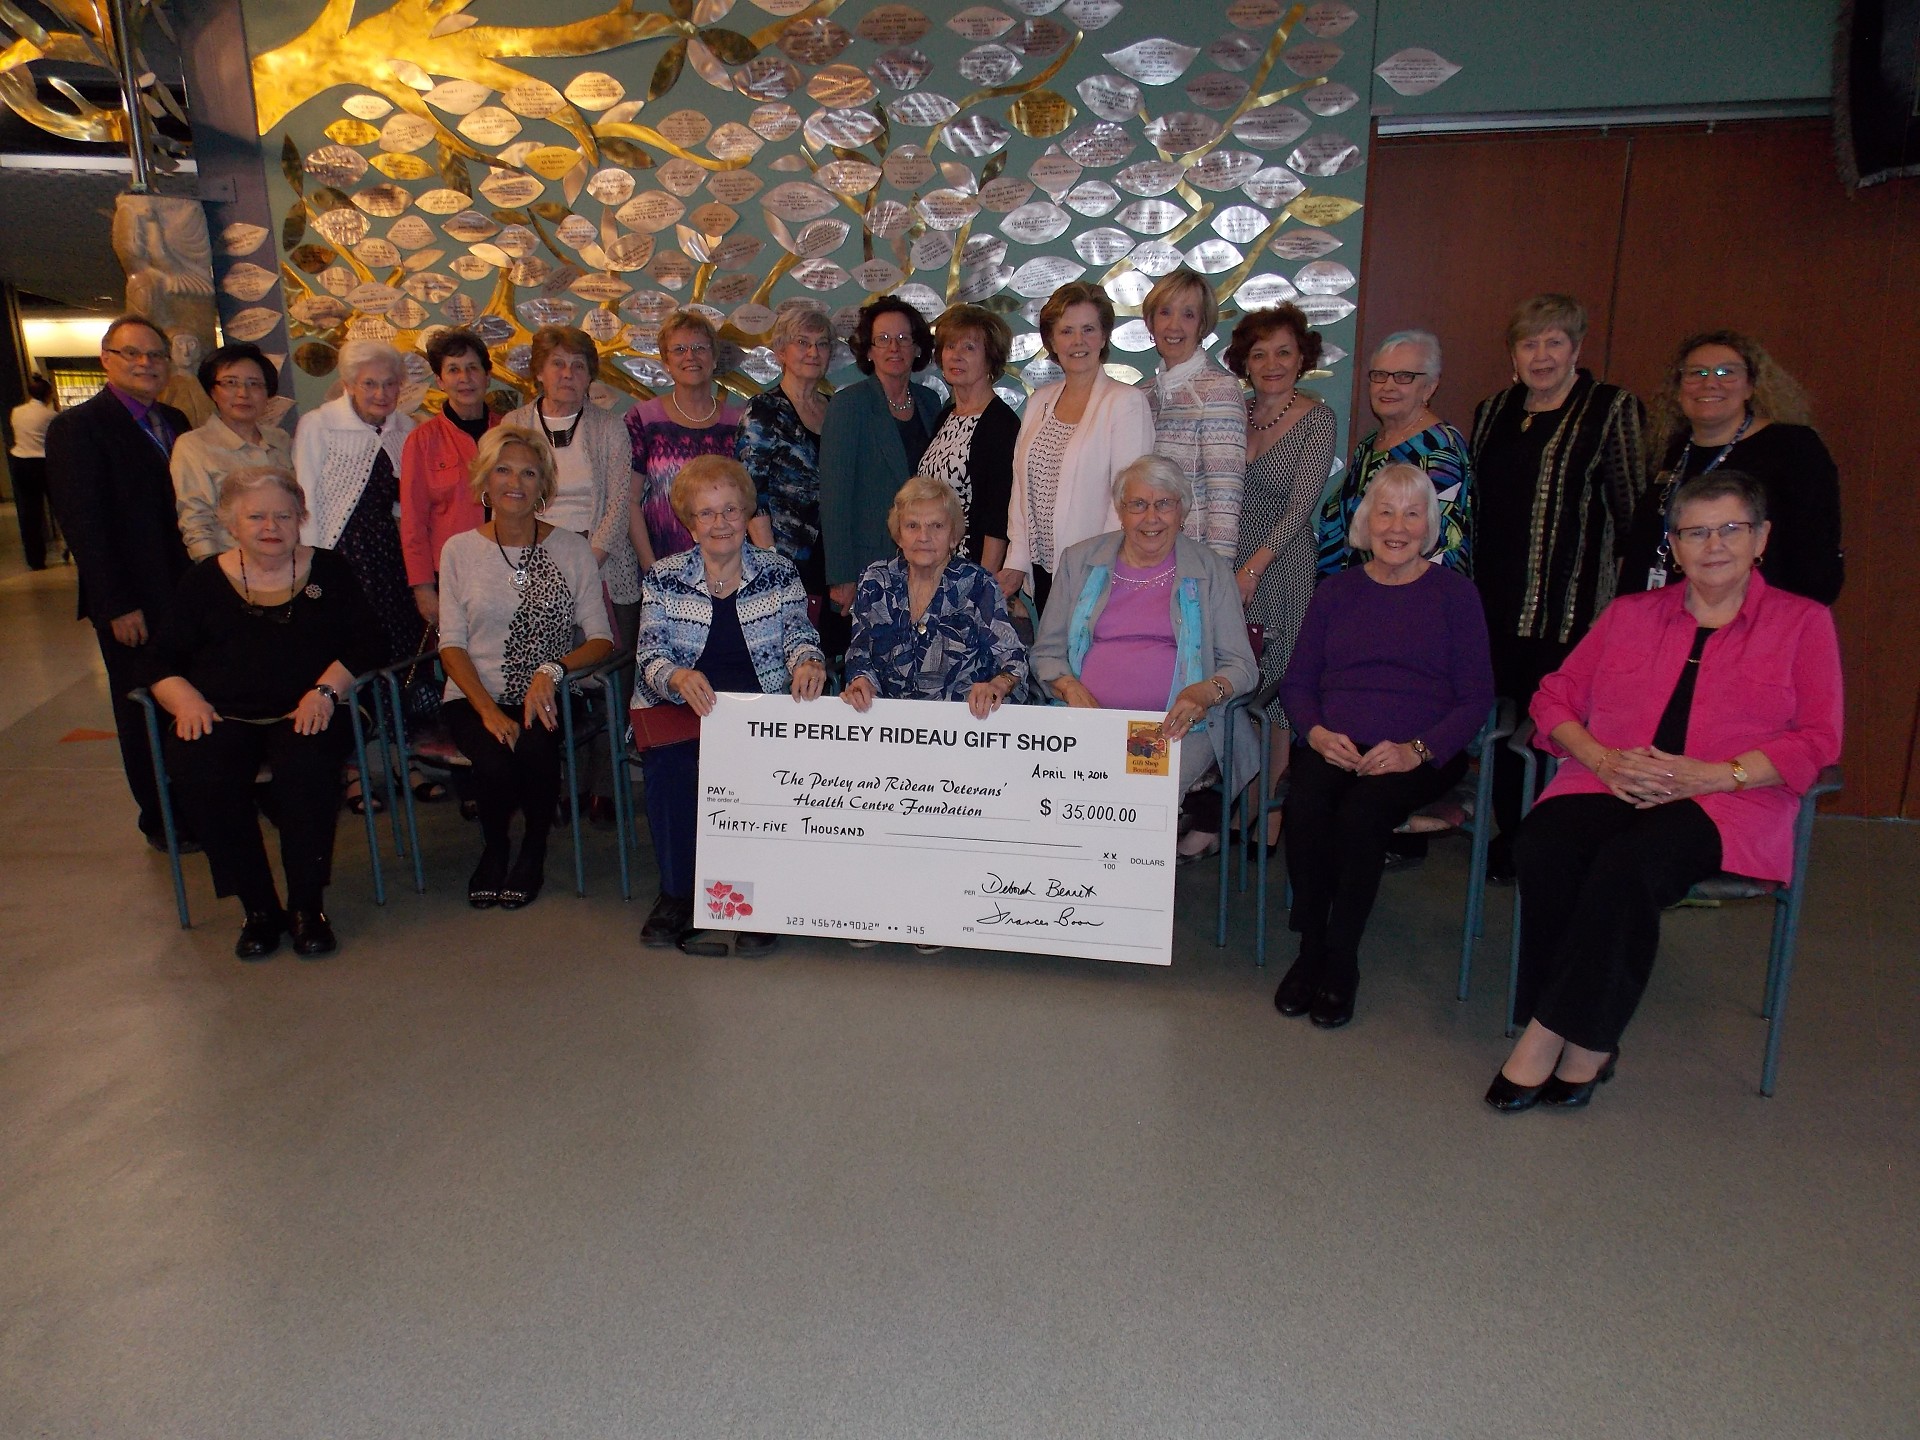 boutique giant cheque donation, group photo